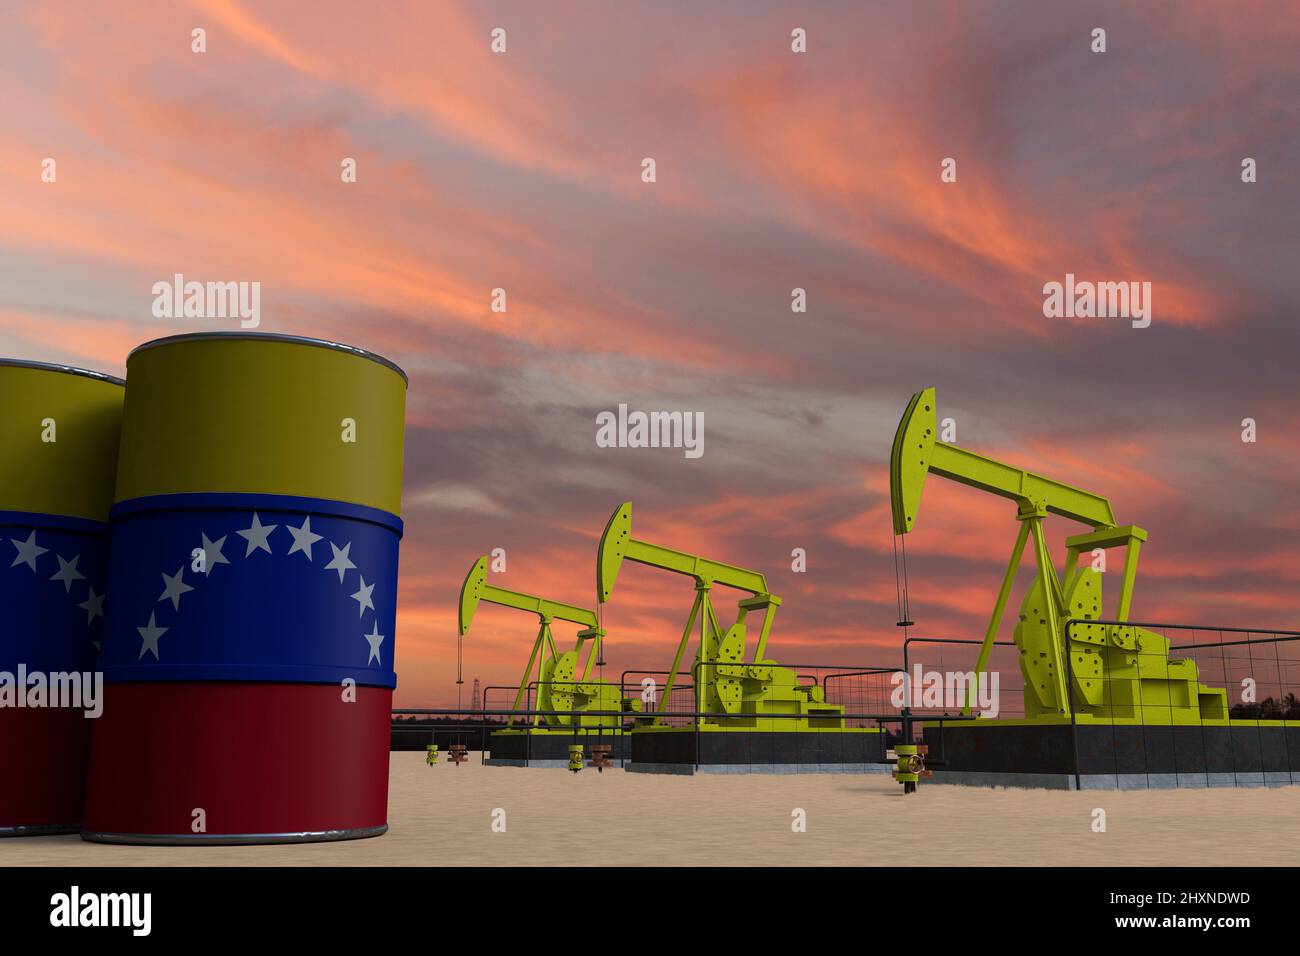 Nice pumpjack oil extraction and cloudy sky in sunset with the Venezuela flag on oil barrels 3D rendering Stock Photo